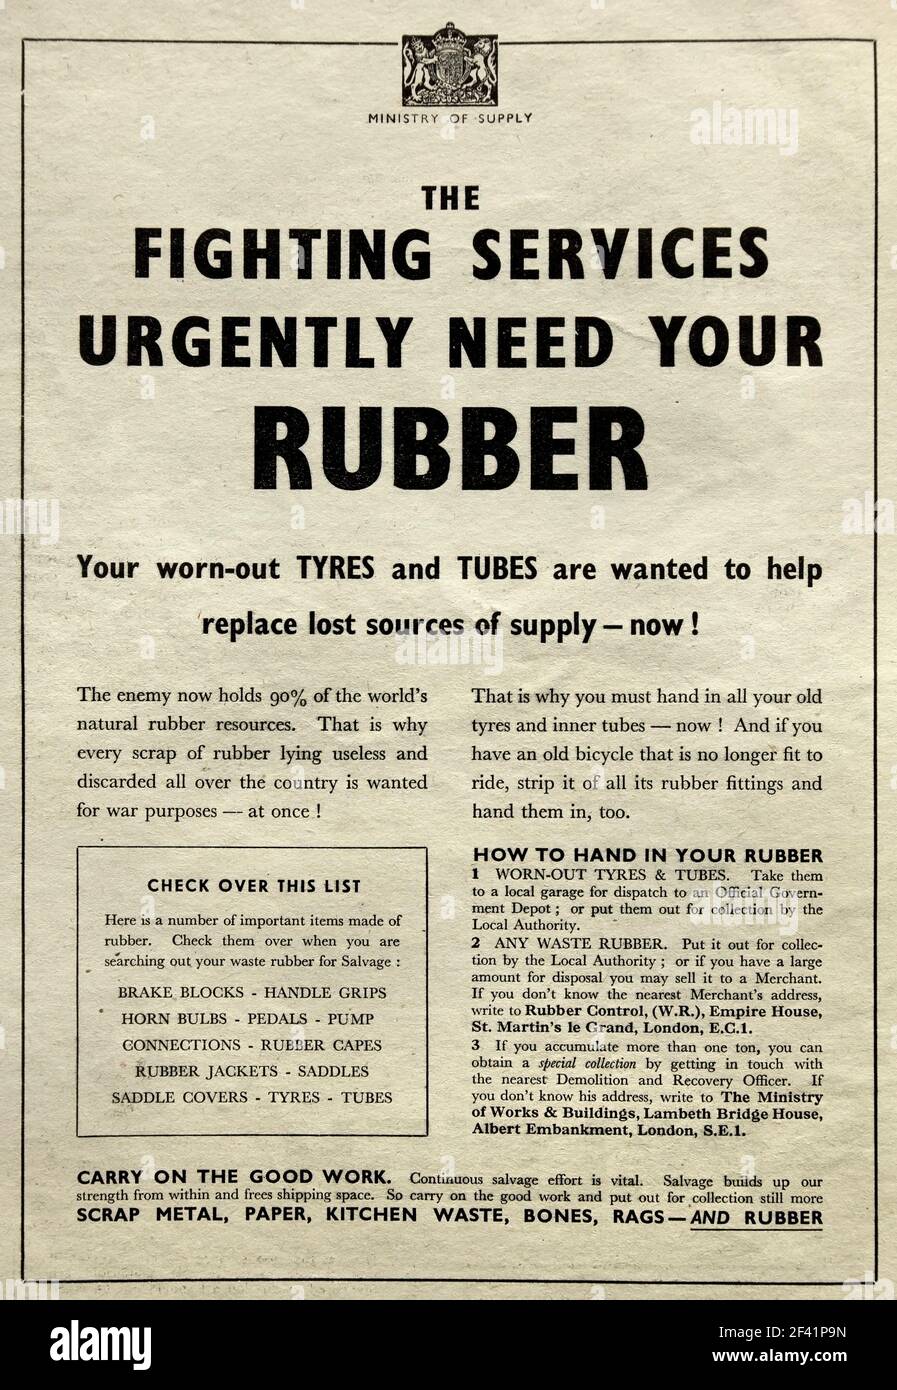 Vintage 1942 wartime notice encouraging cyclists to save and recycle rubber, from the Ministry of Supply. Stock Photo